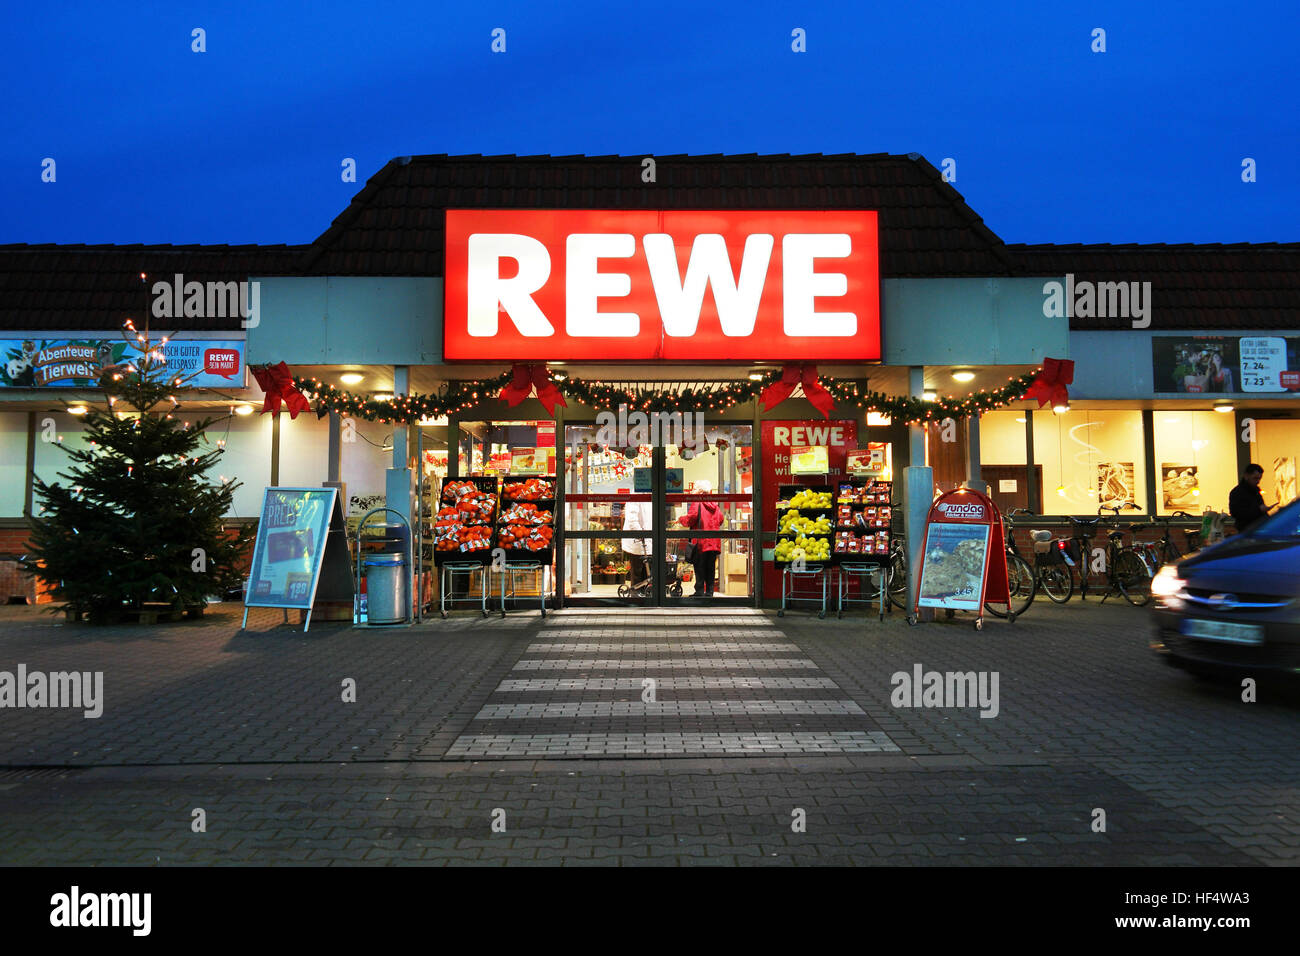 Rewe Supermarket High Resolution Stock Photography and Images - Alamy